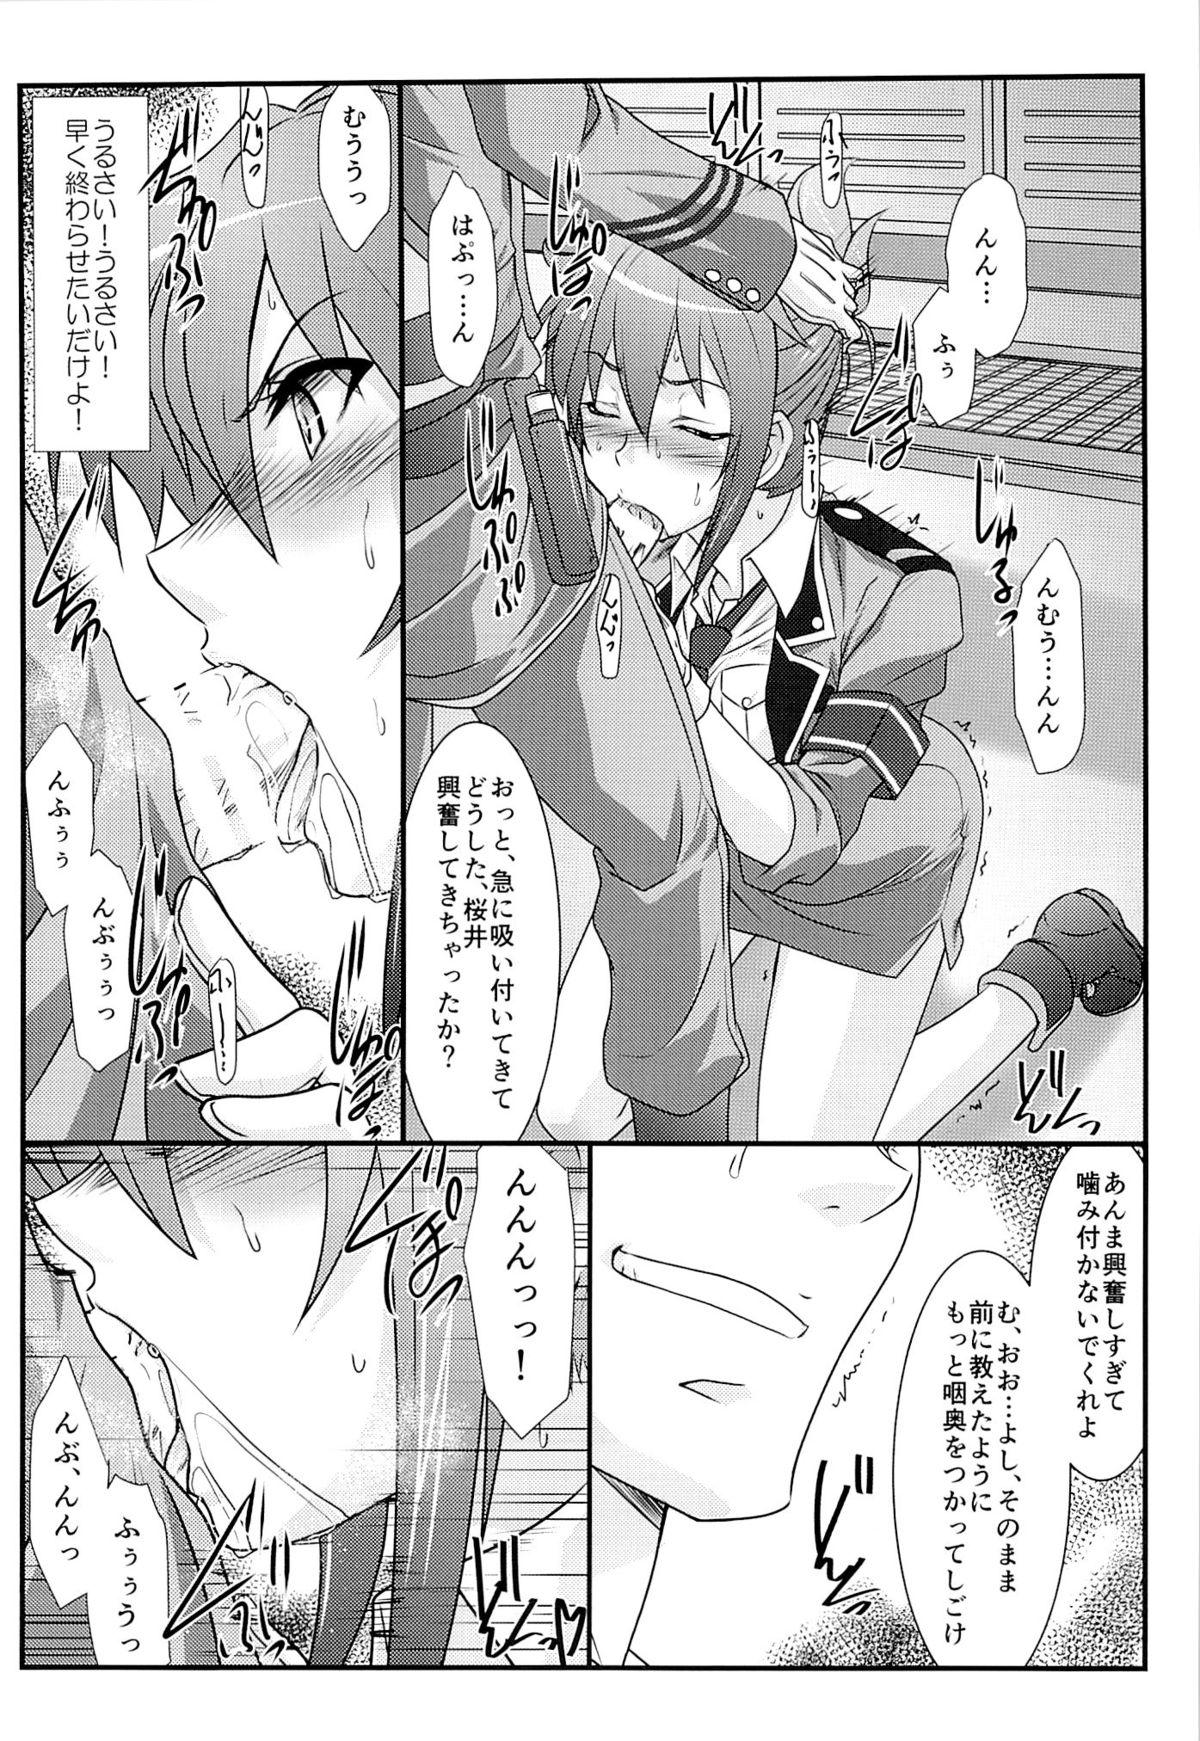 Threeway Astral Bout Ver.30 - Rail wars Money - Page 5